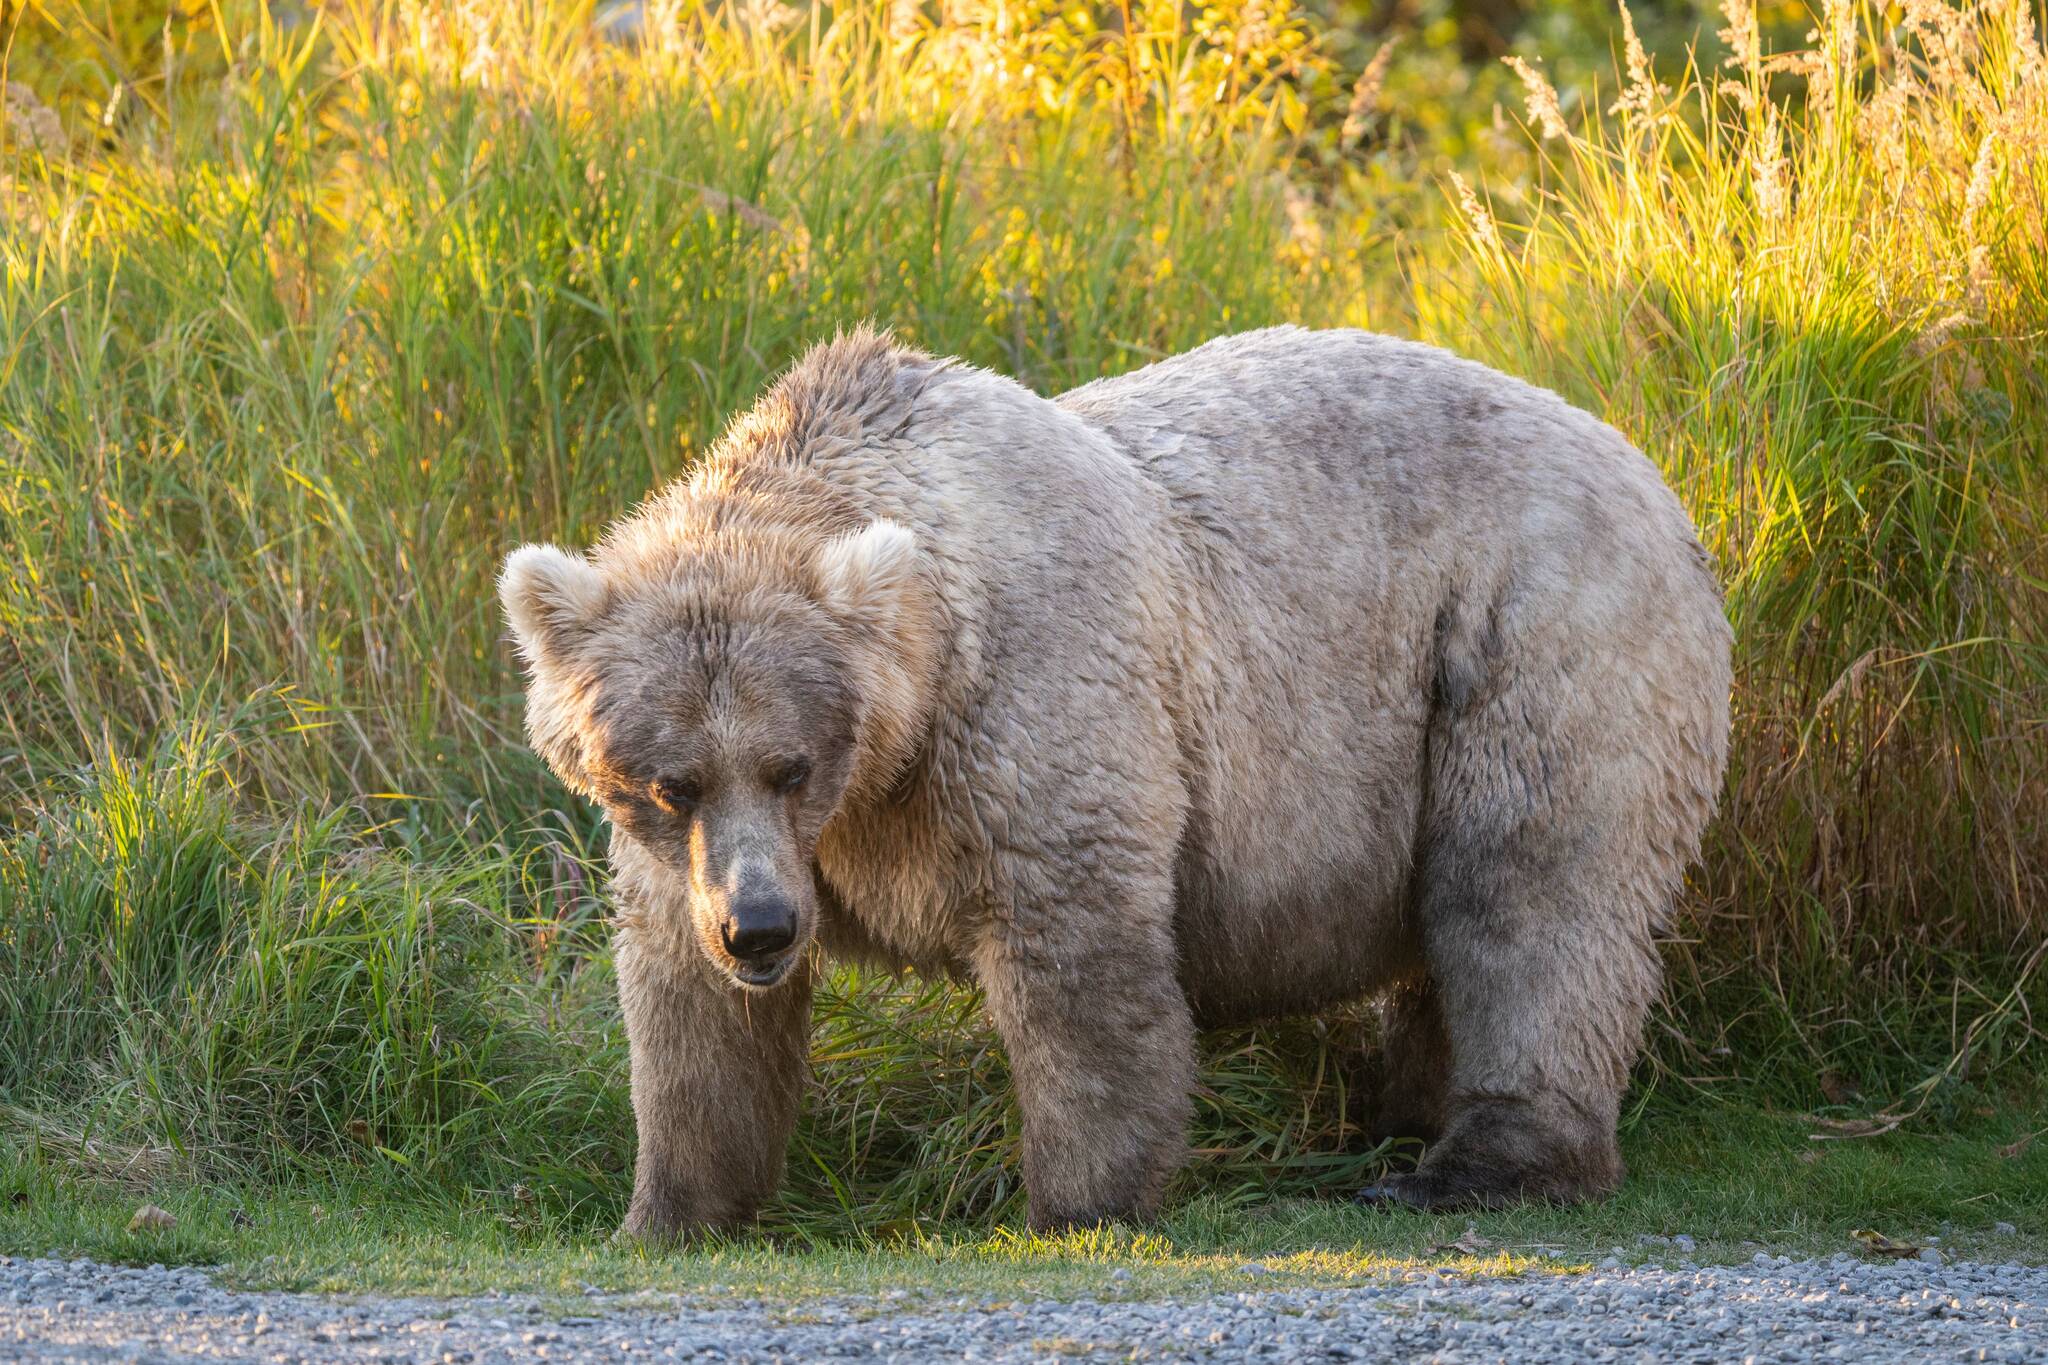 Bear 435 Holly, the 2019 Champion of Fat Bear Week, trudges through Katmai National Park, Alaska. The winner of a Thursday matchup between Bear 284 Electra and Bear 164 Bucky will meet Holly in Fat Bear Week competition on Saturday. (Photo courtesy K. Moore/National Park Service)